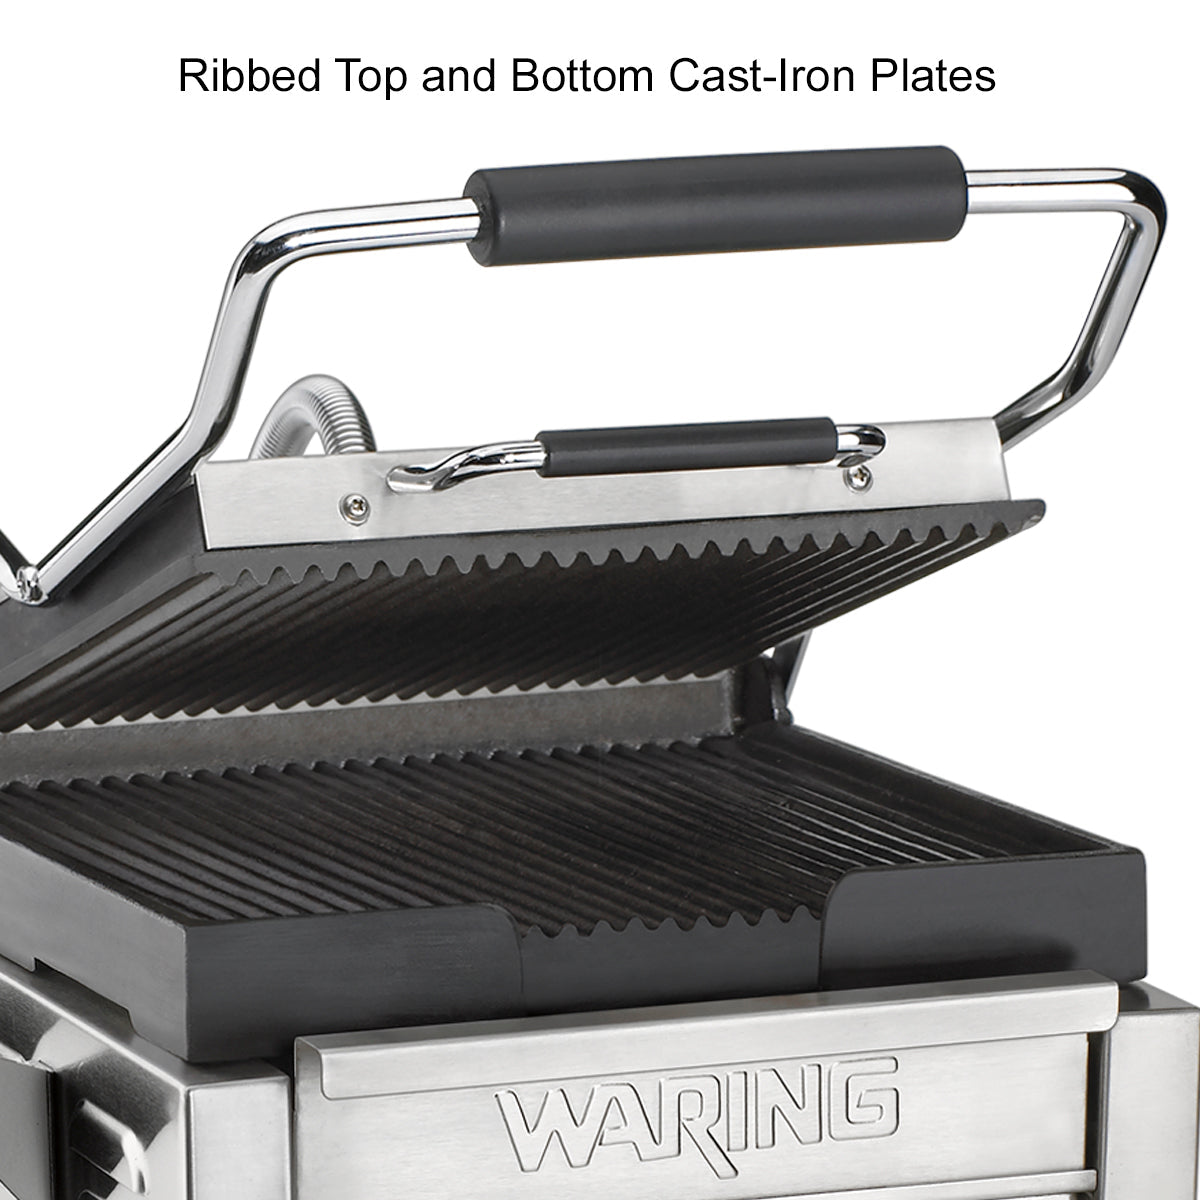 WPG250T  Panini Supremo with Timer - Large Panini Grill by Waring Commercial